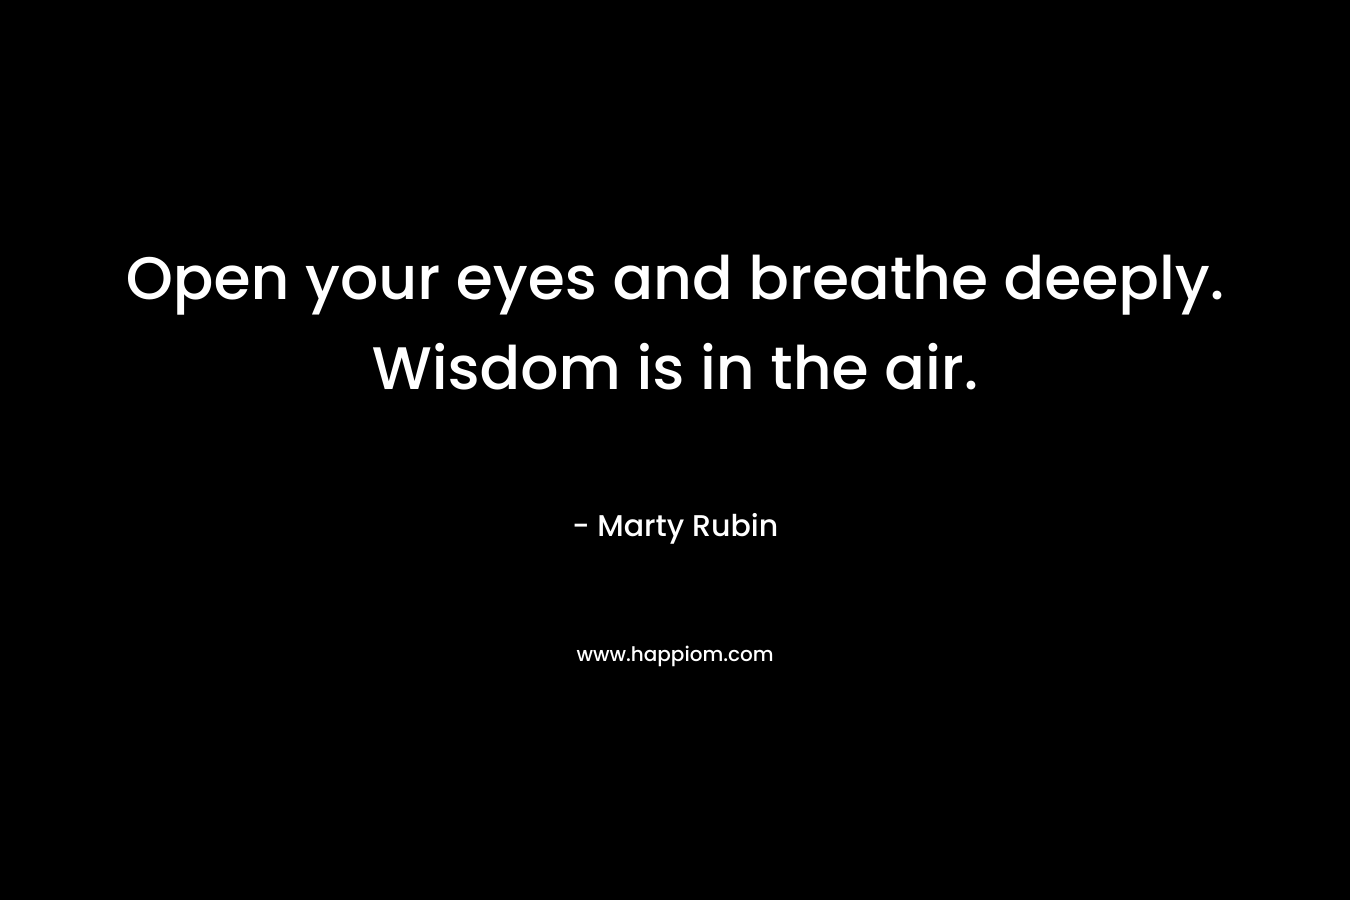 Open your eyes and breathe deeply. Wisdom is in the air. – Marty Rubin